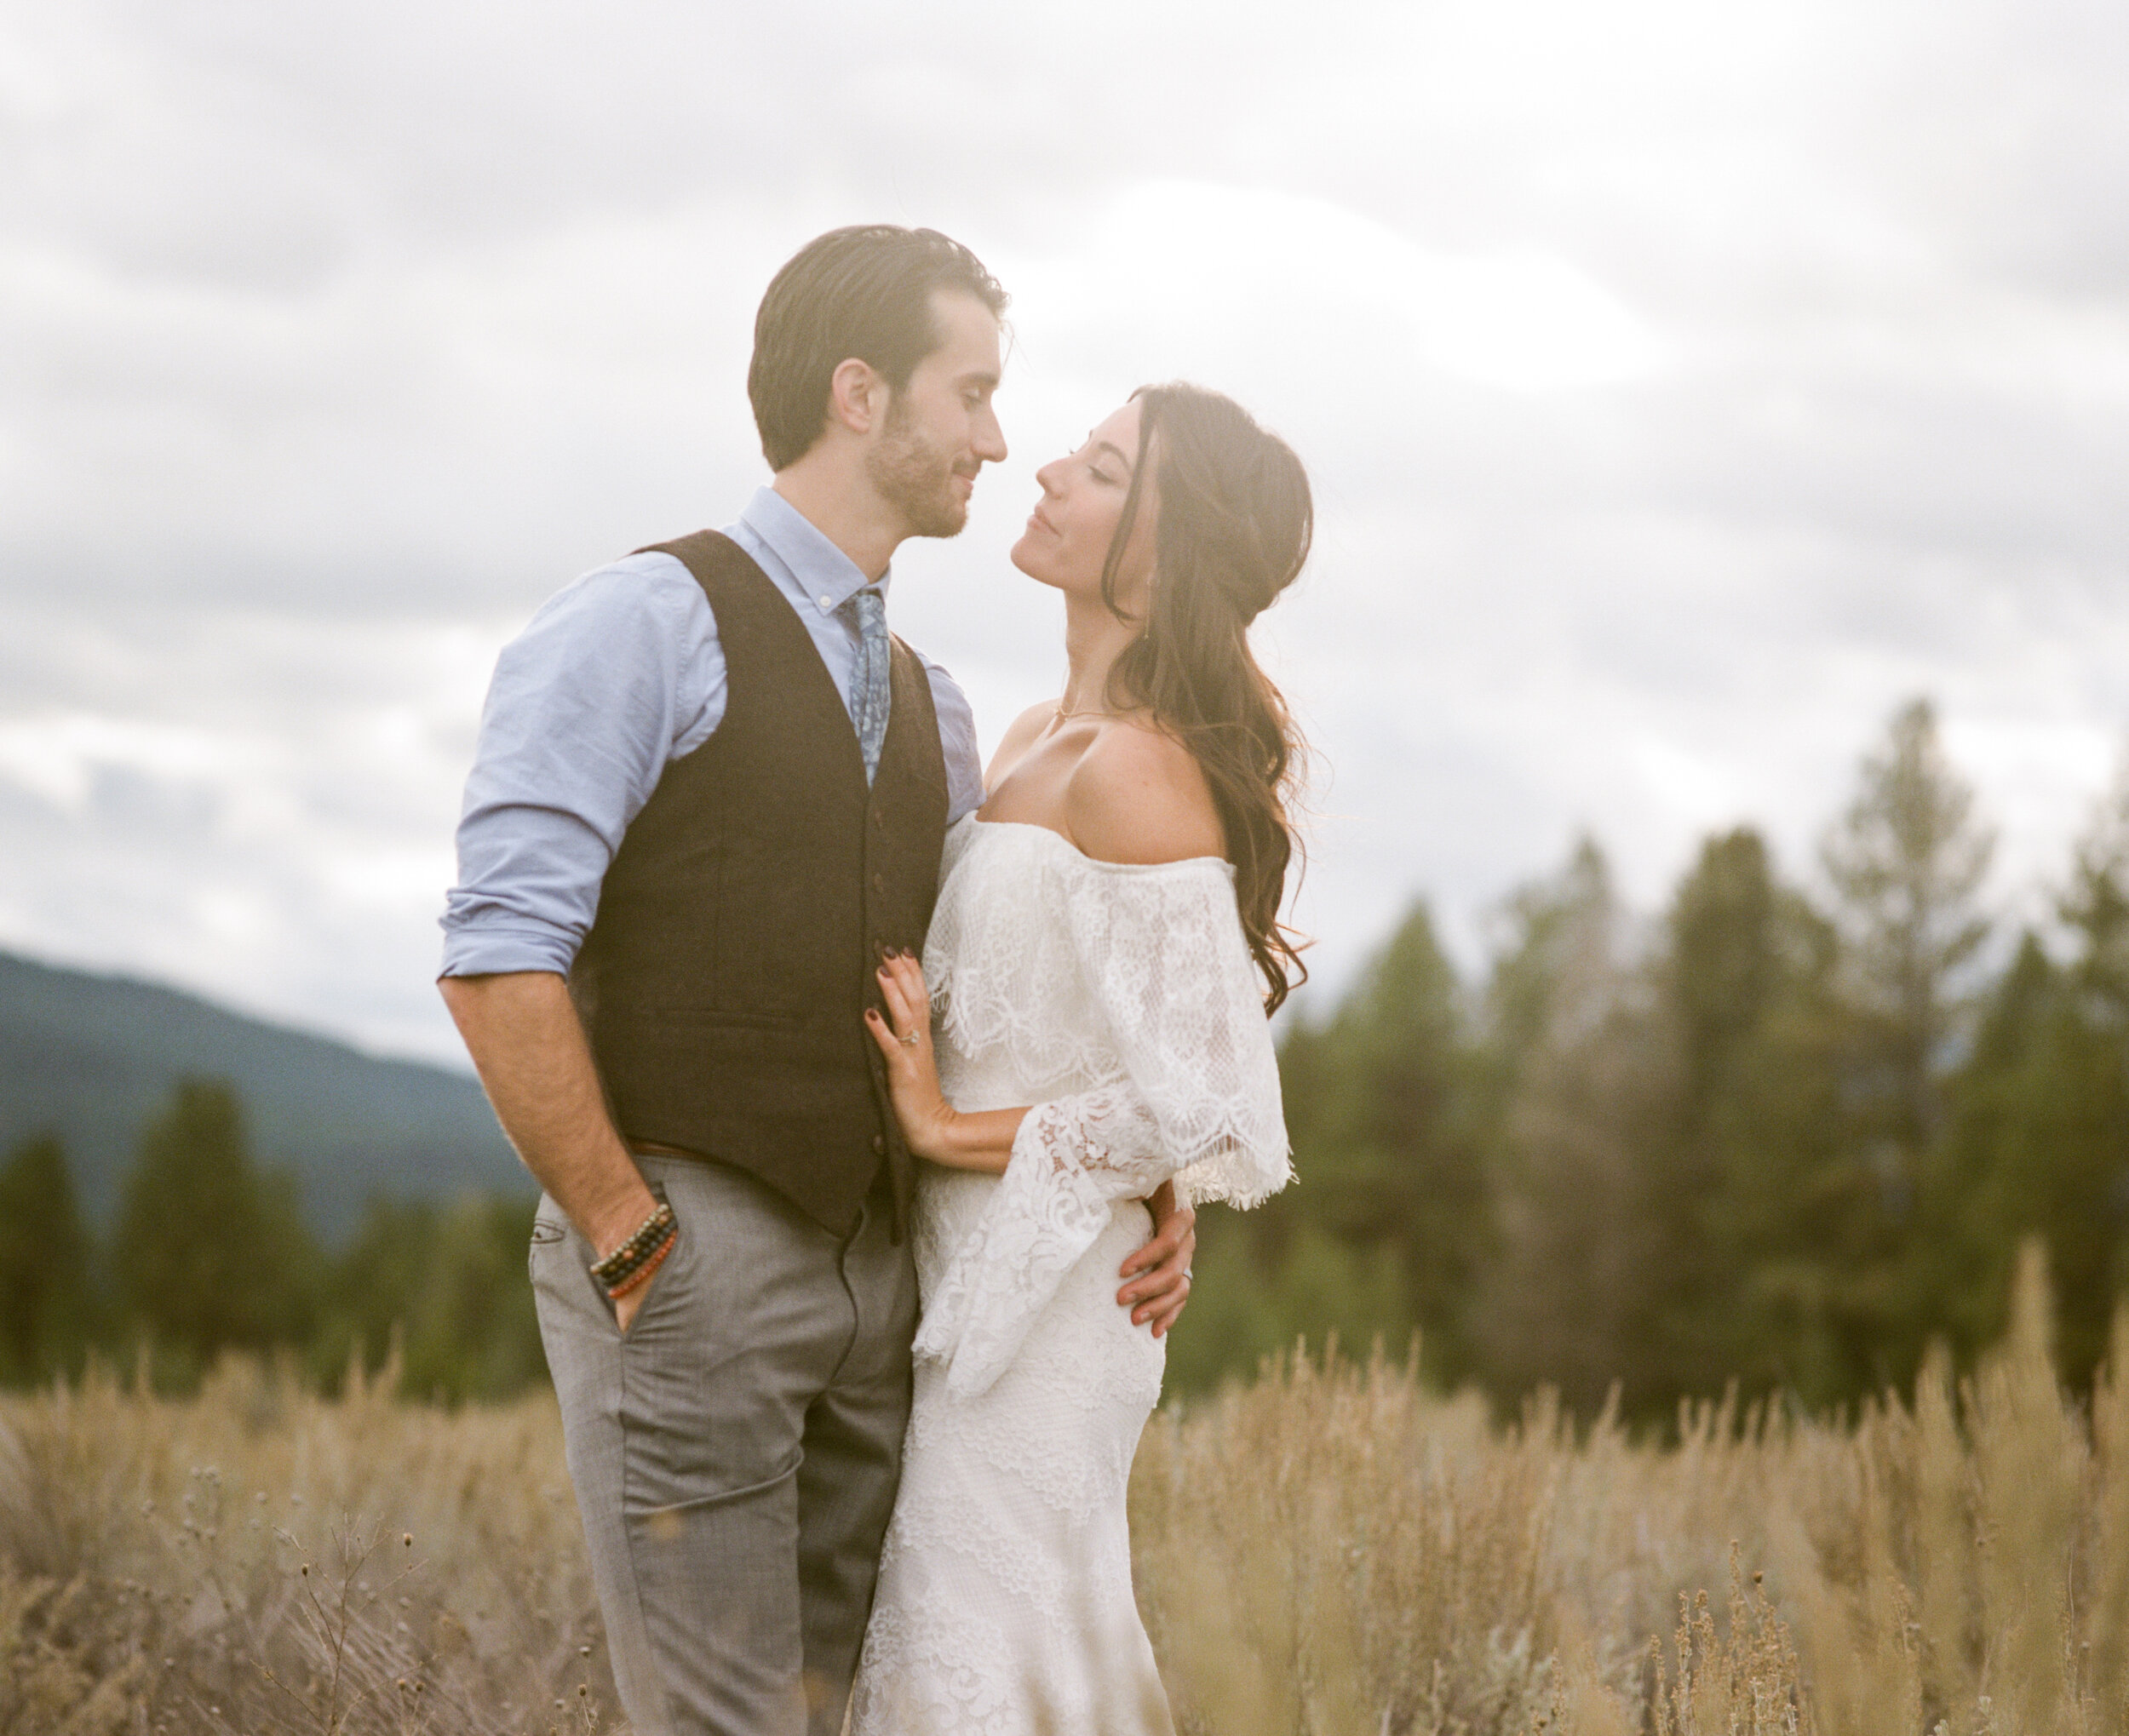  Wedding Photography by Stuart Thurlkill of Eyes 2 See Photography. Wedding is in Big sky Montana at the resort at Paws up in Greenough. 